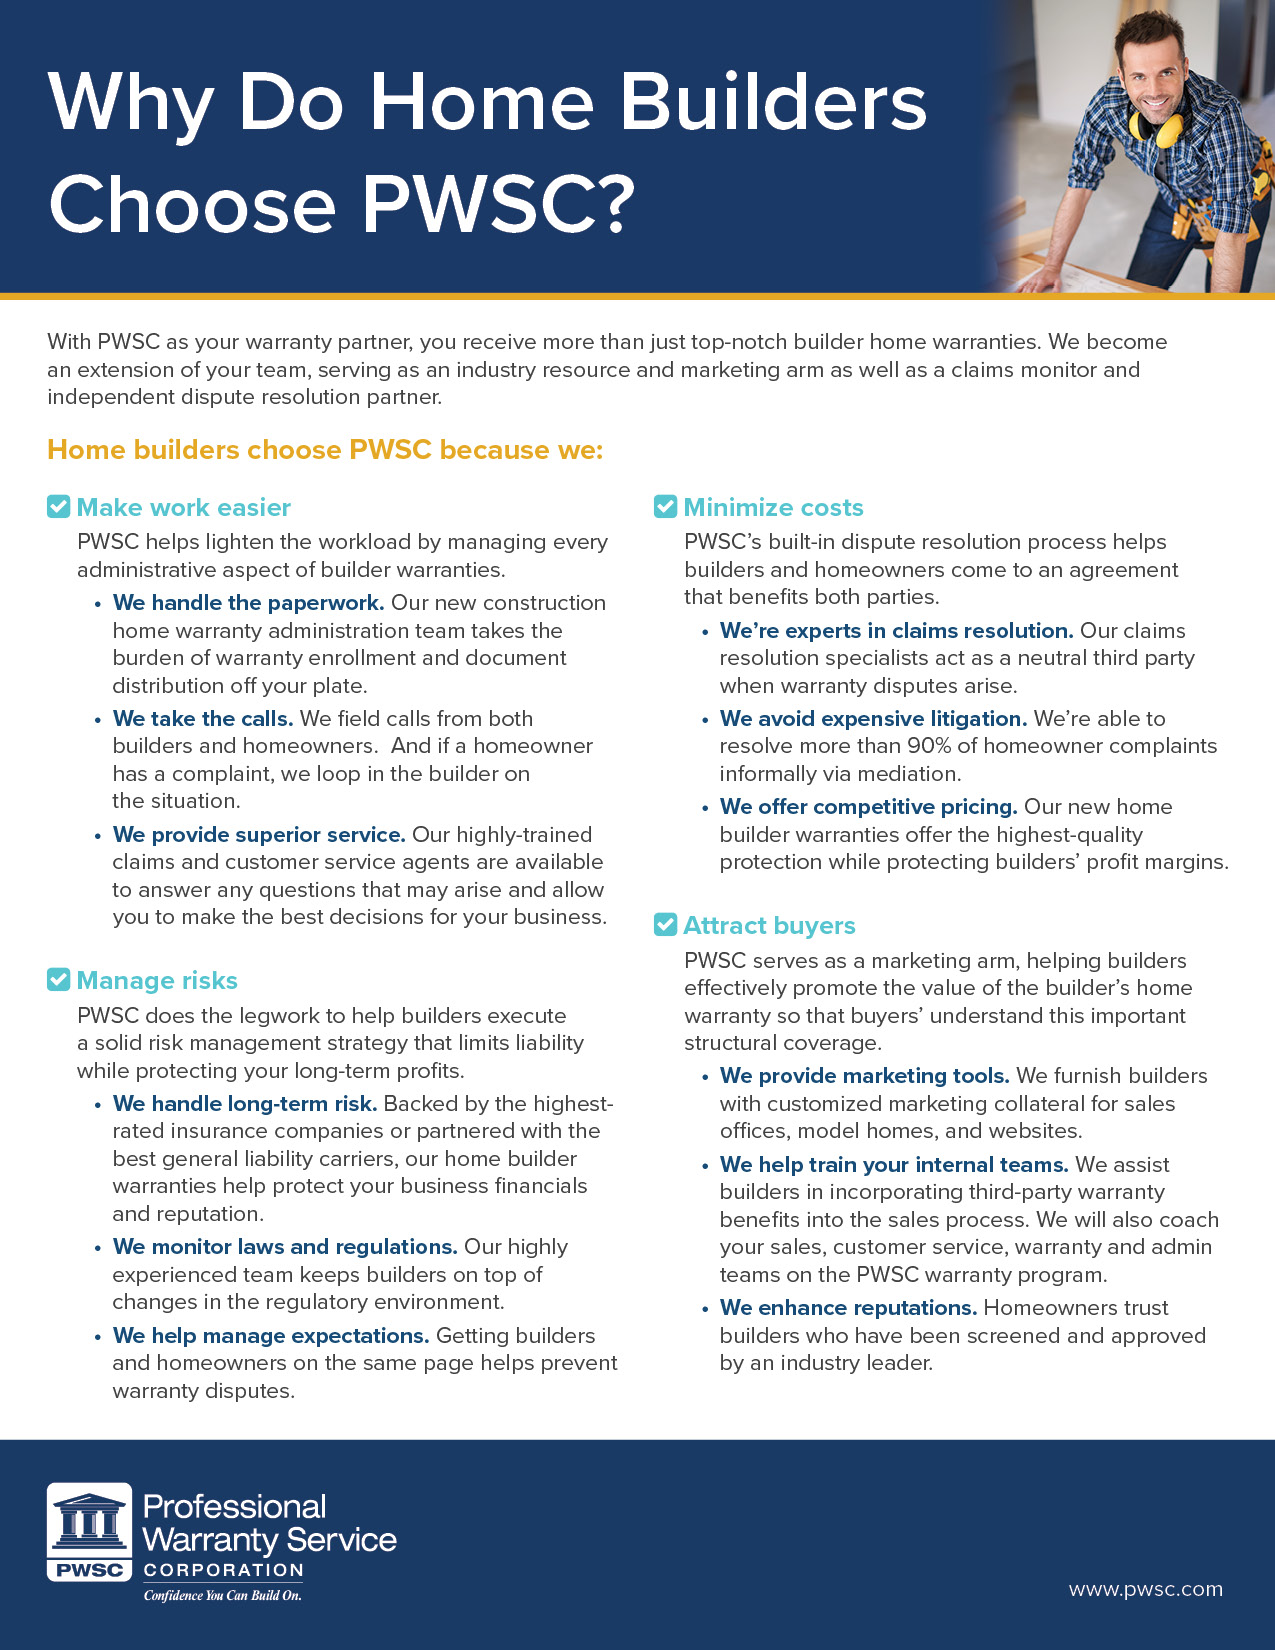 Why-Do-Home-Builders-Choose-PWSC